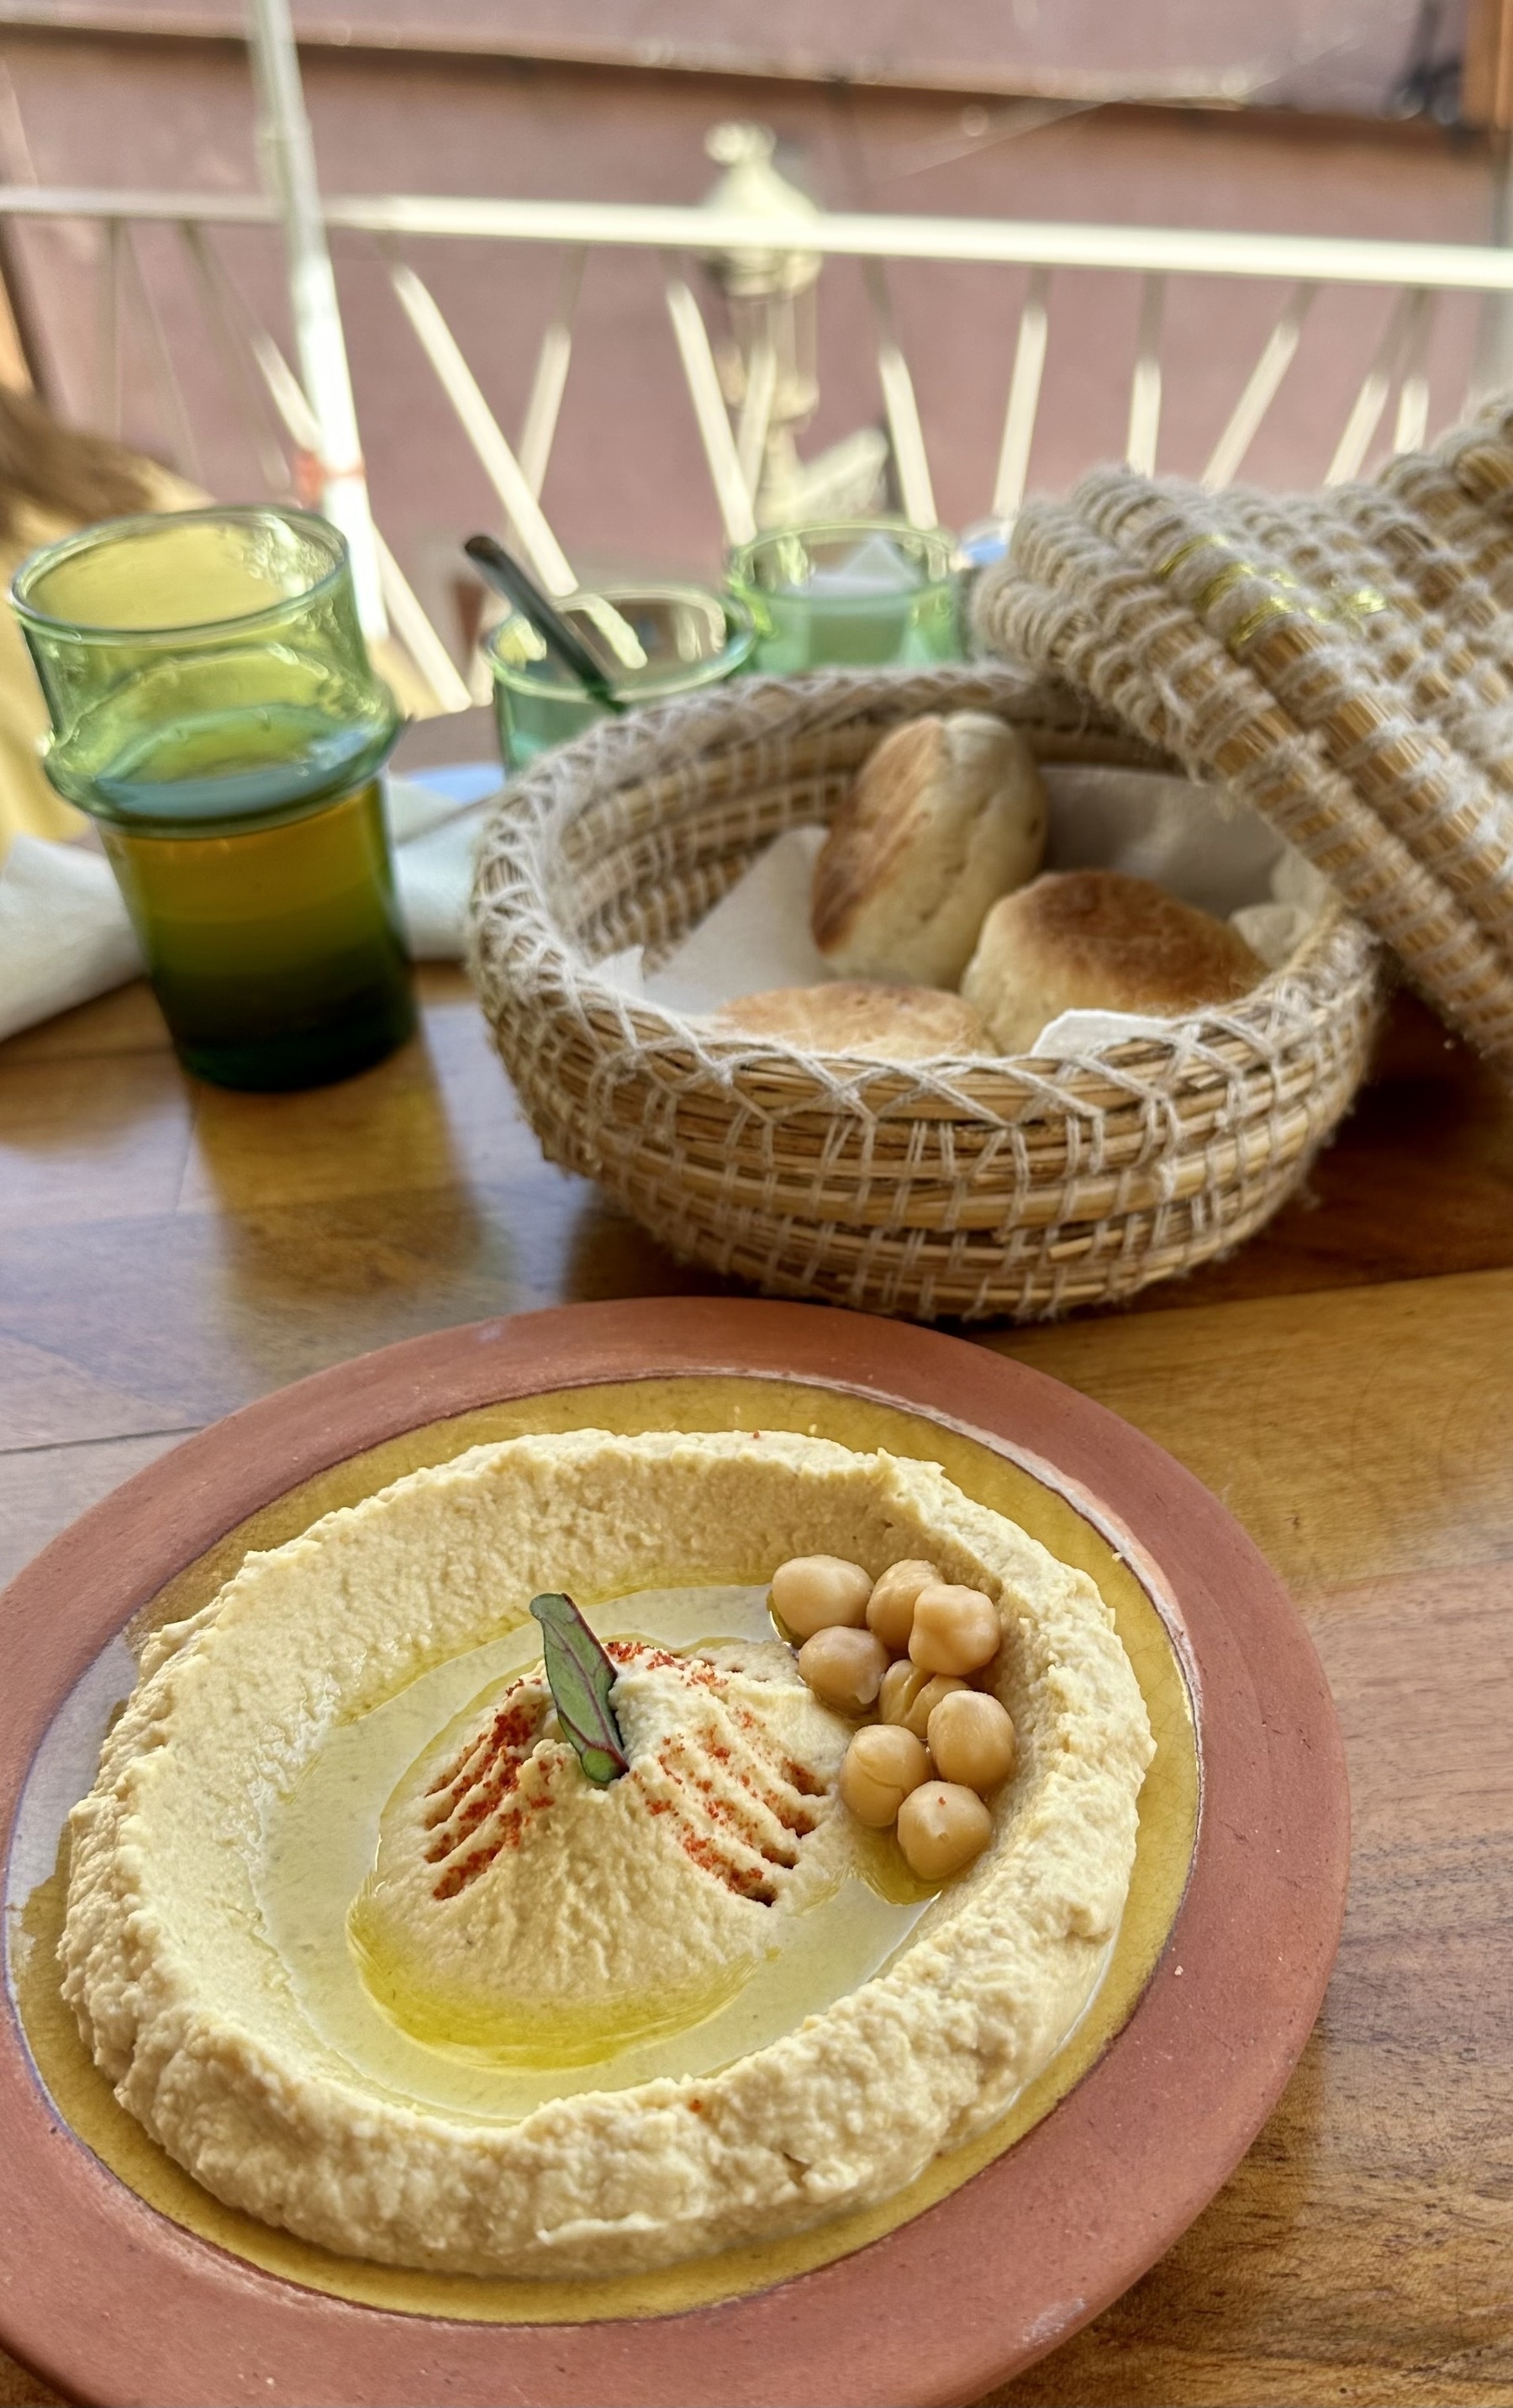 Hummus on a plate with some small bread rolls in a woven basket in the background, along with a glass of tea.